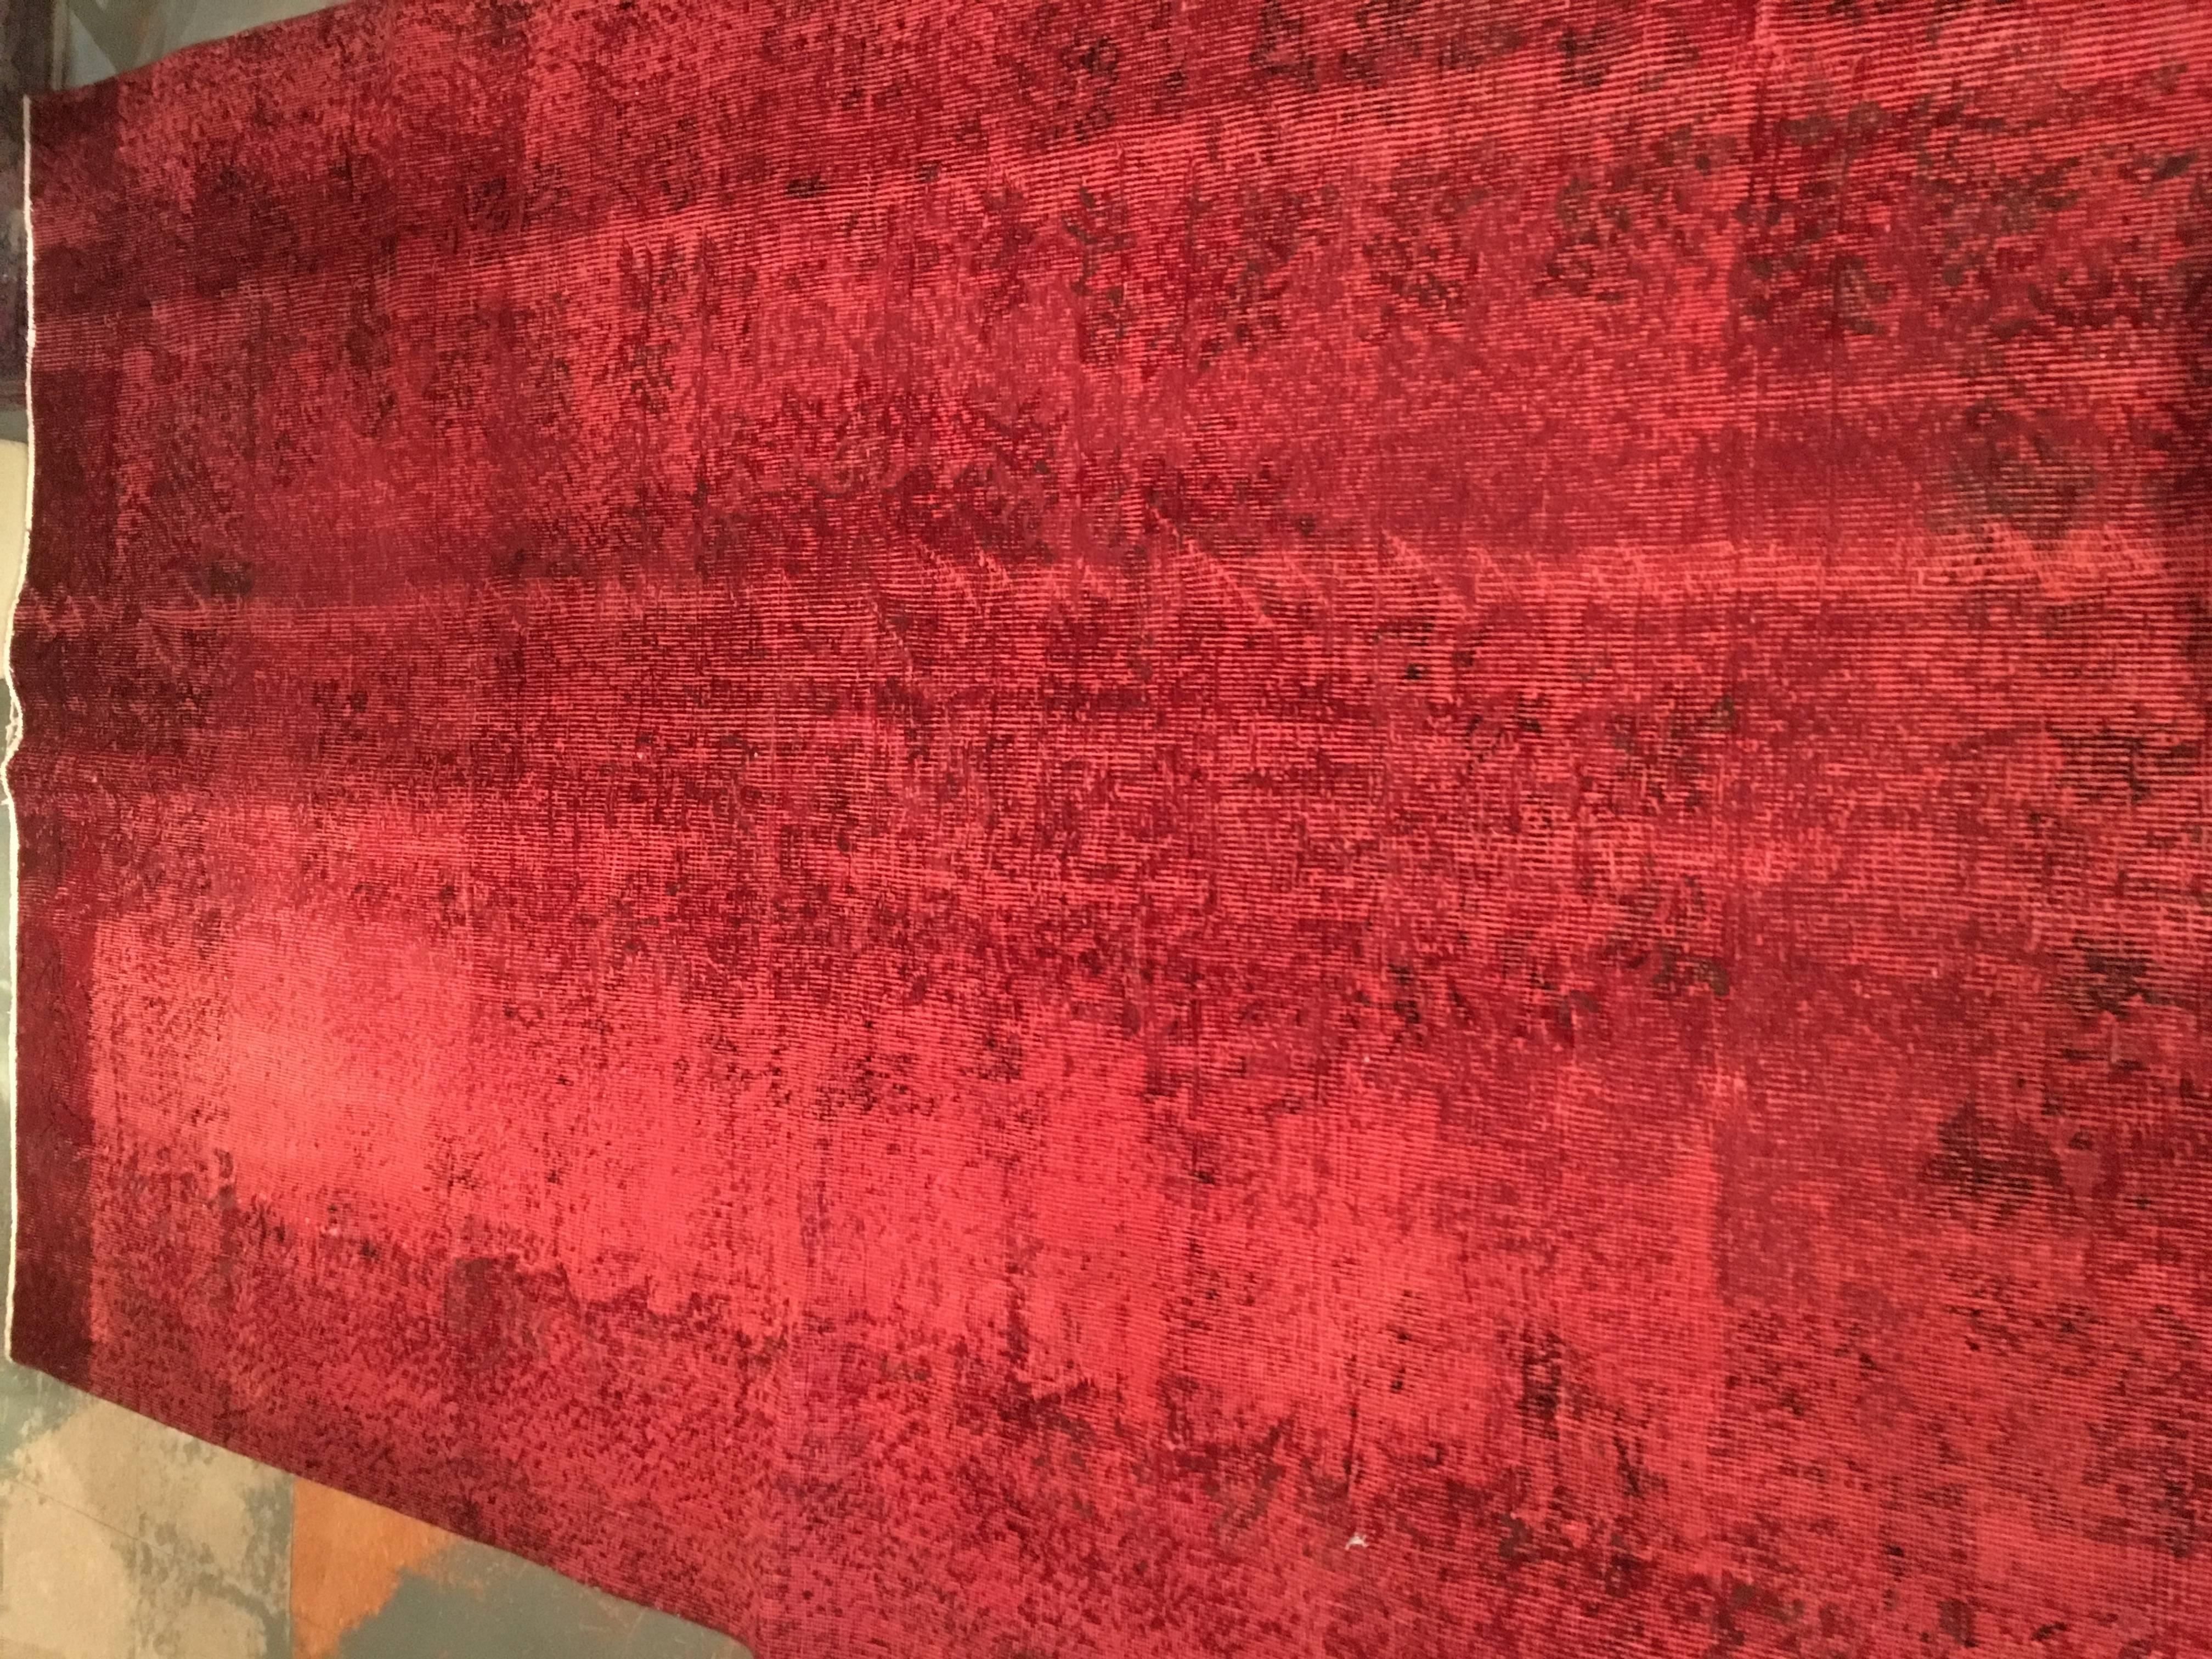 Nice mid size overdyed rug in reds with touches of black
Measures: 57 1/2 x 93 1/2.